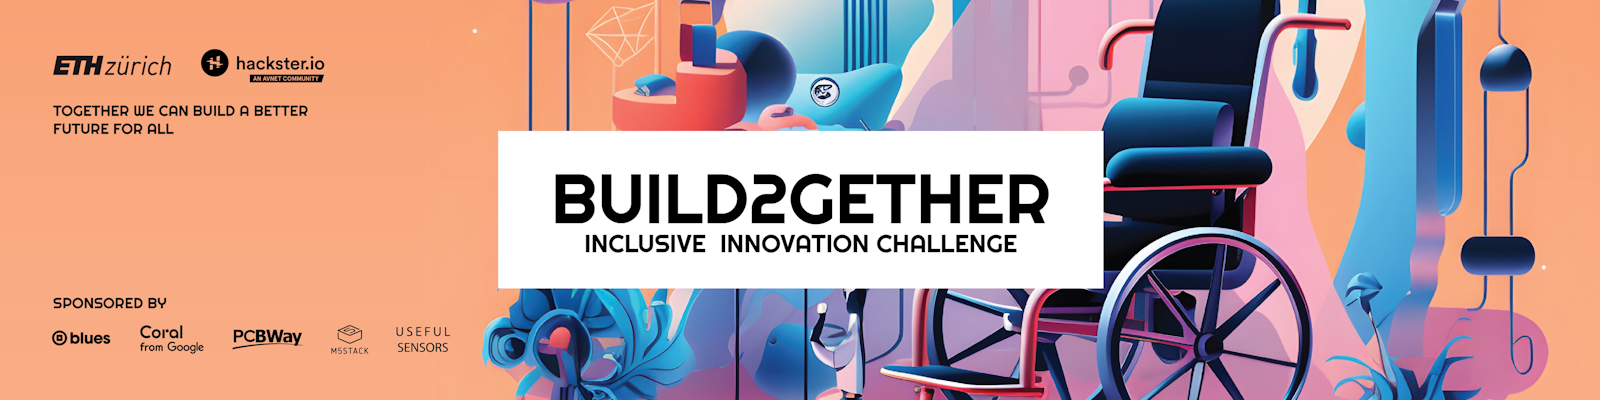 Build2gether Inclusive Innovation Challenge